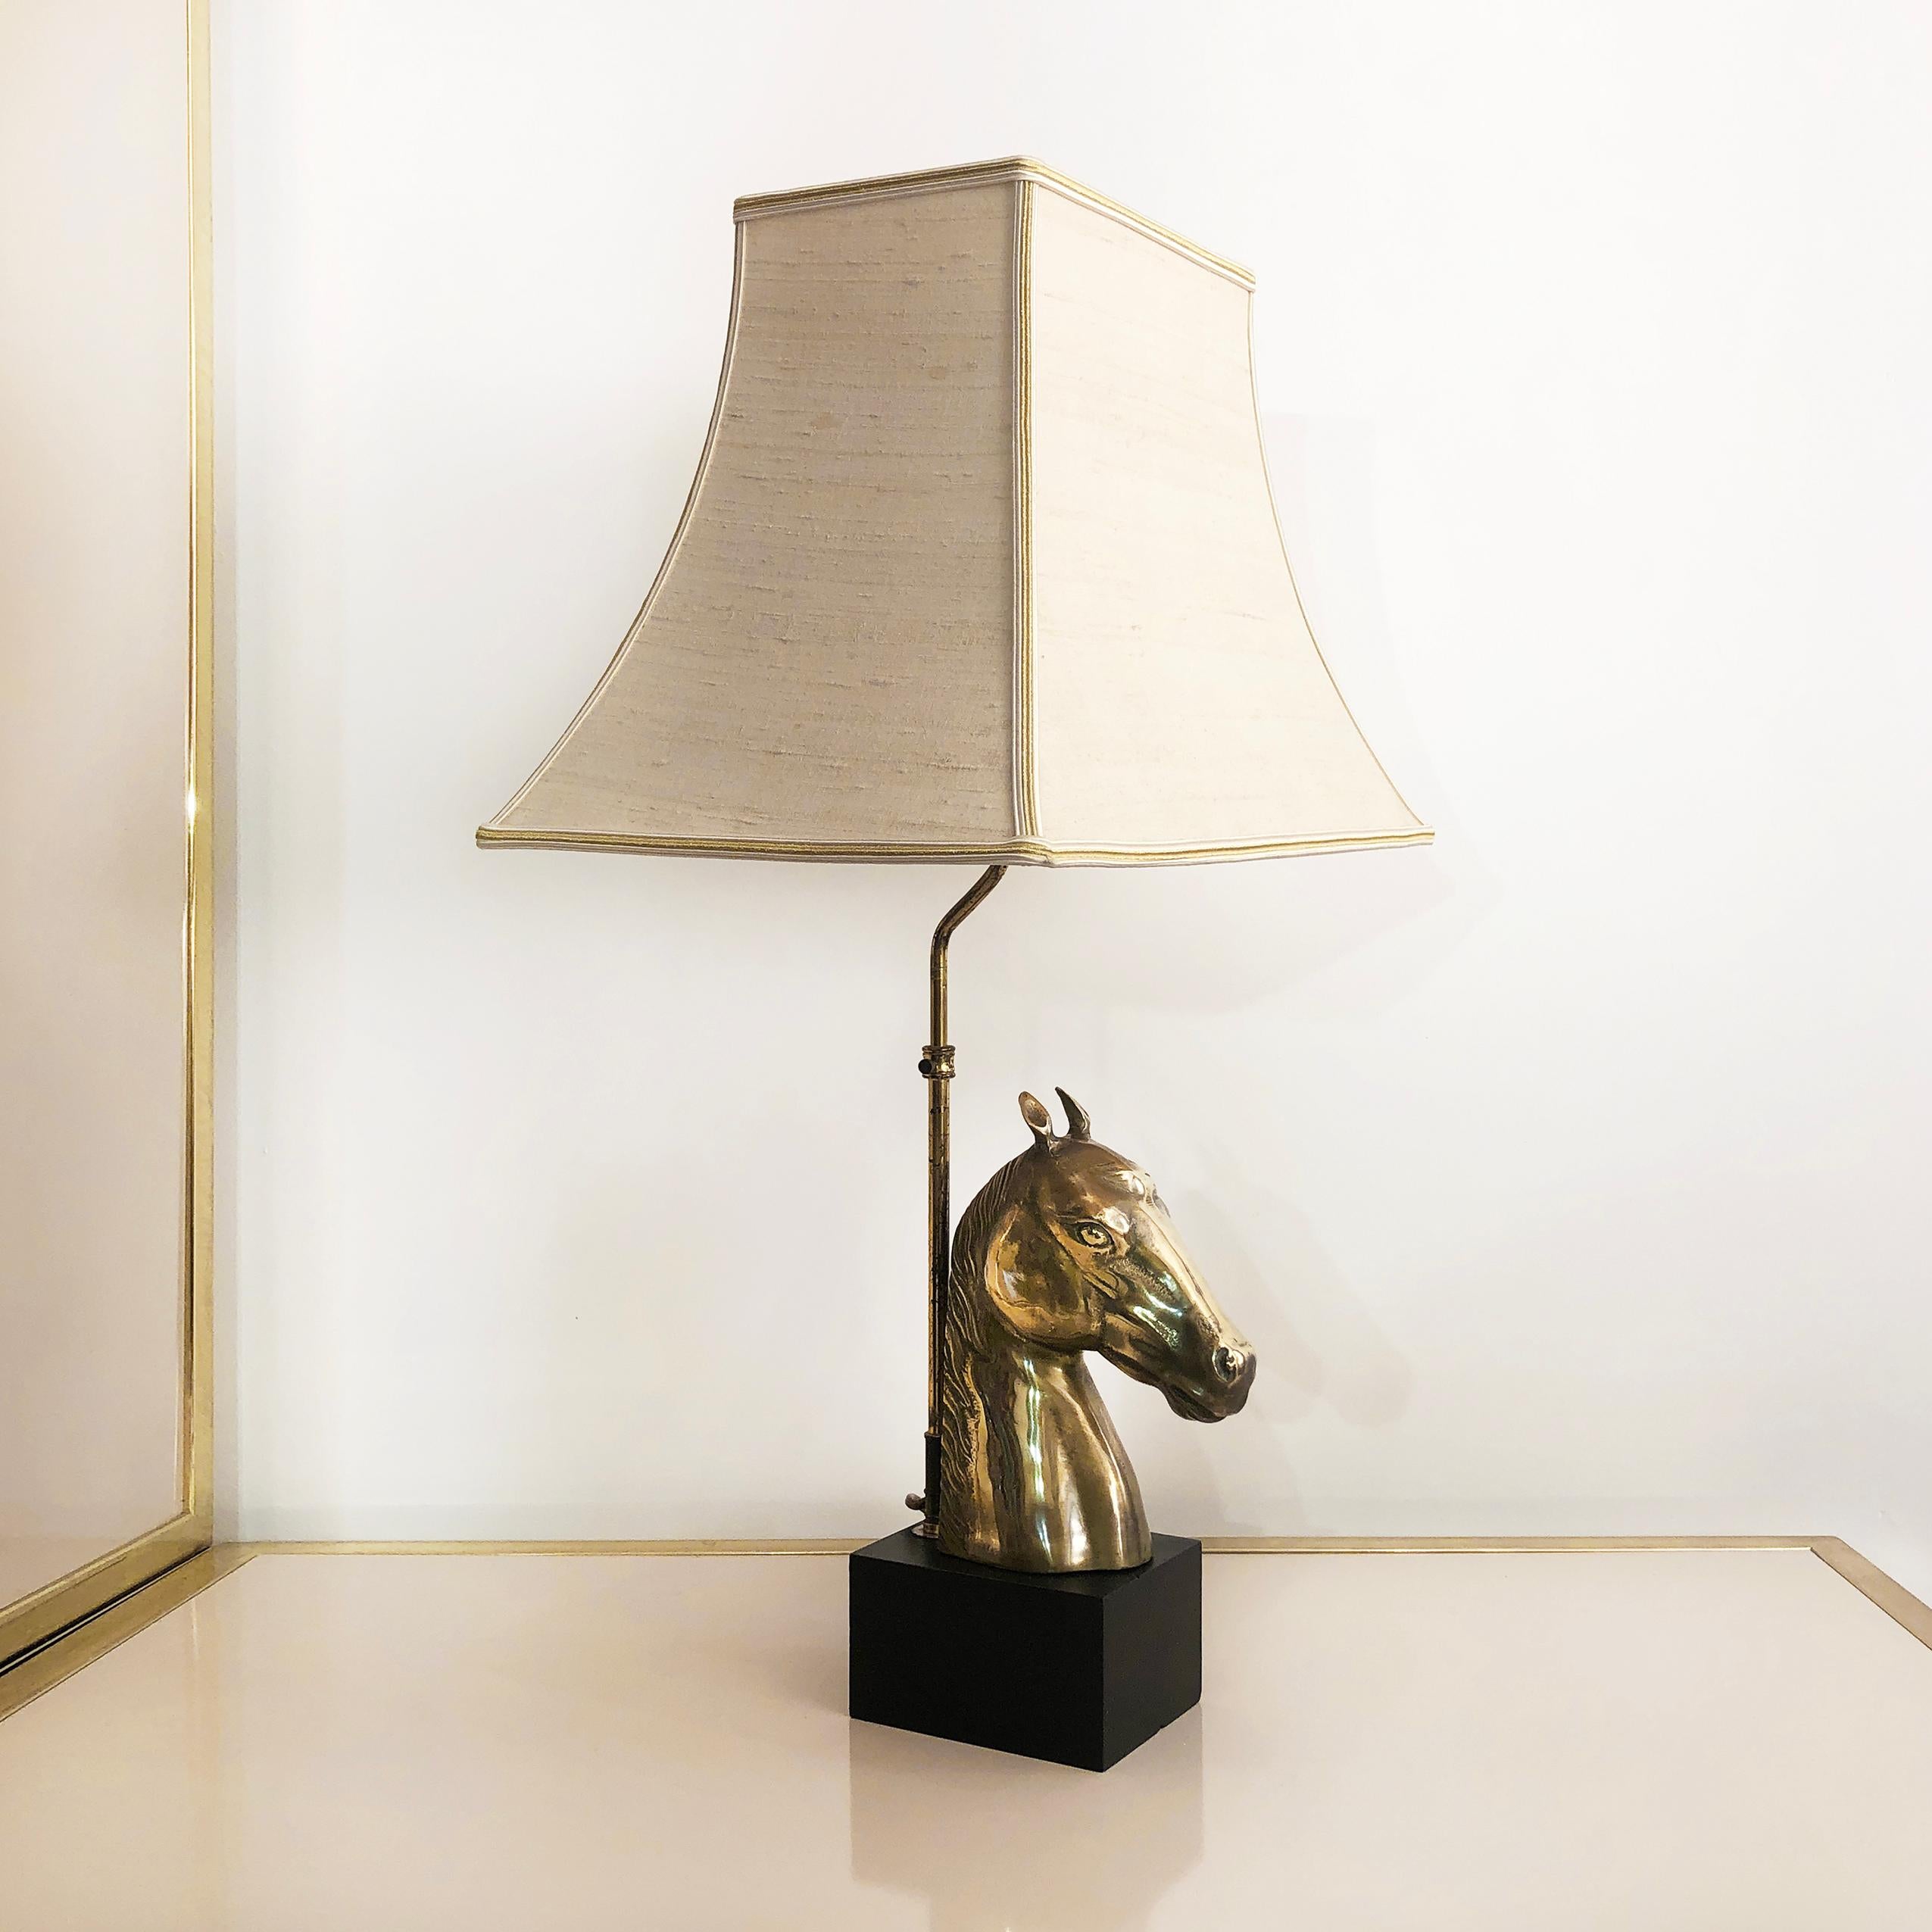 Brass Horse Chinoiserie Table Lamp 1970s Hollywood Regency Midcentury Antique For Sale 1